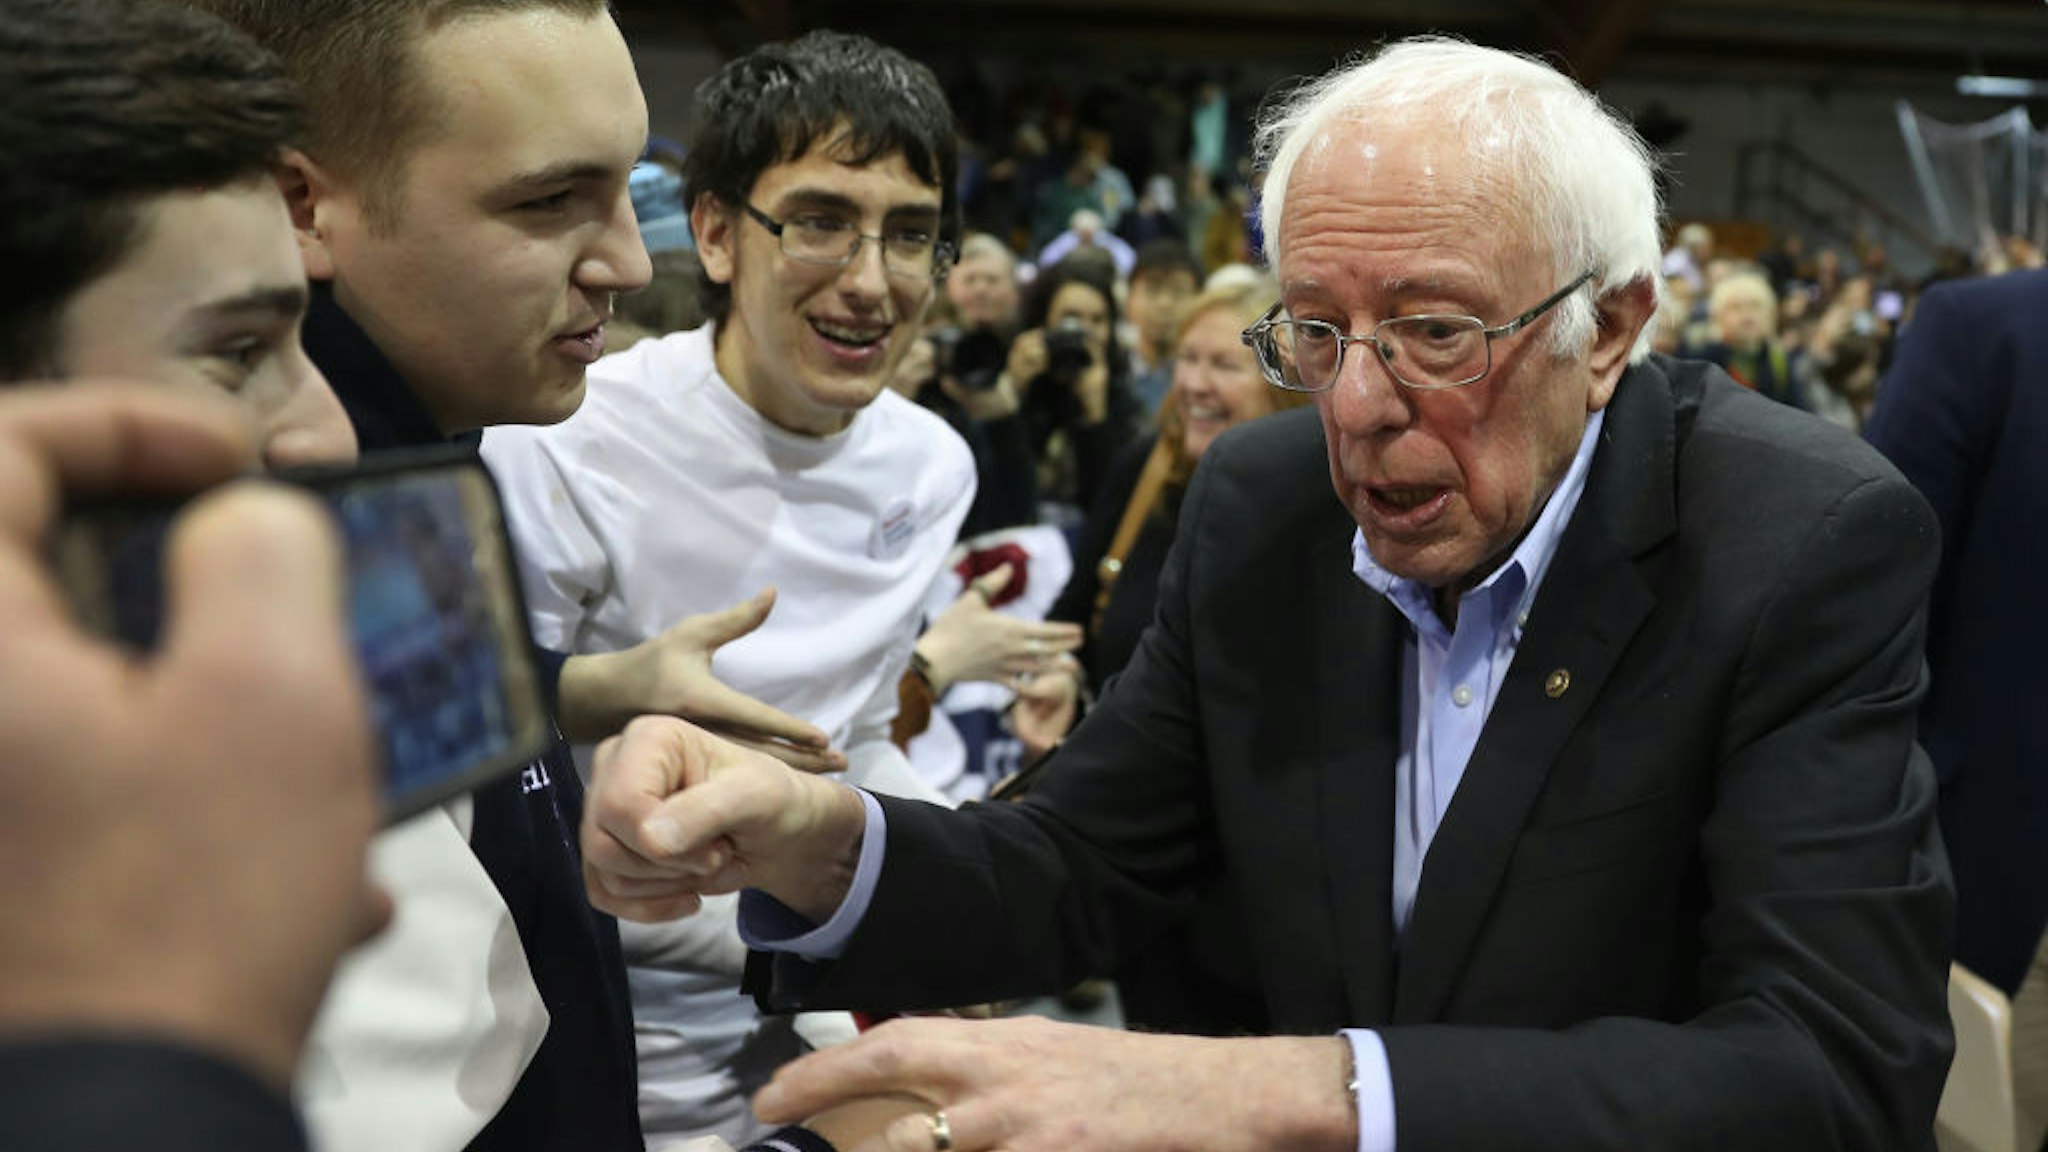 Democratic presidential candidate Sen. Bernie Sanders (I-VT) greets people after speaking during a campaign event the Franklin Pierce University on February 10, 2020 in Rindge, New Hampshire.